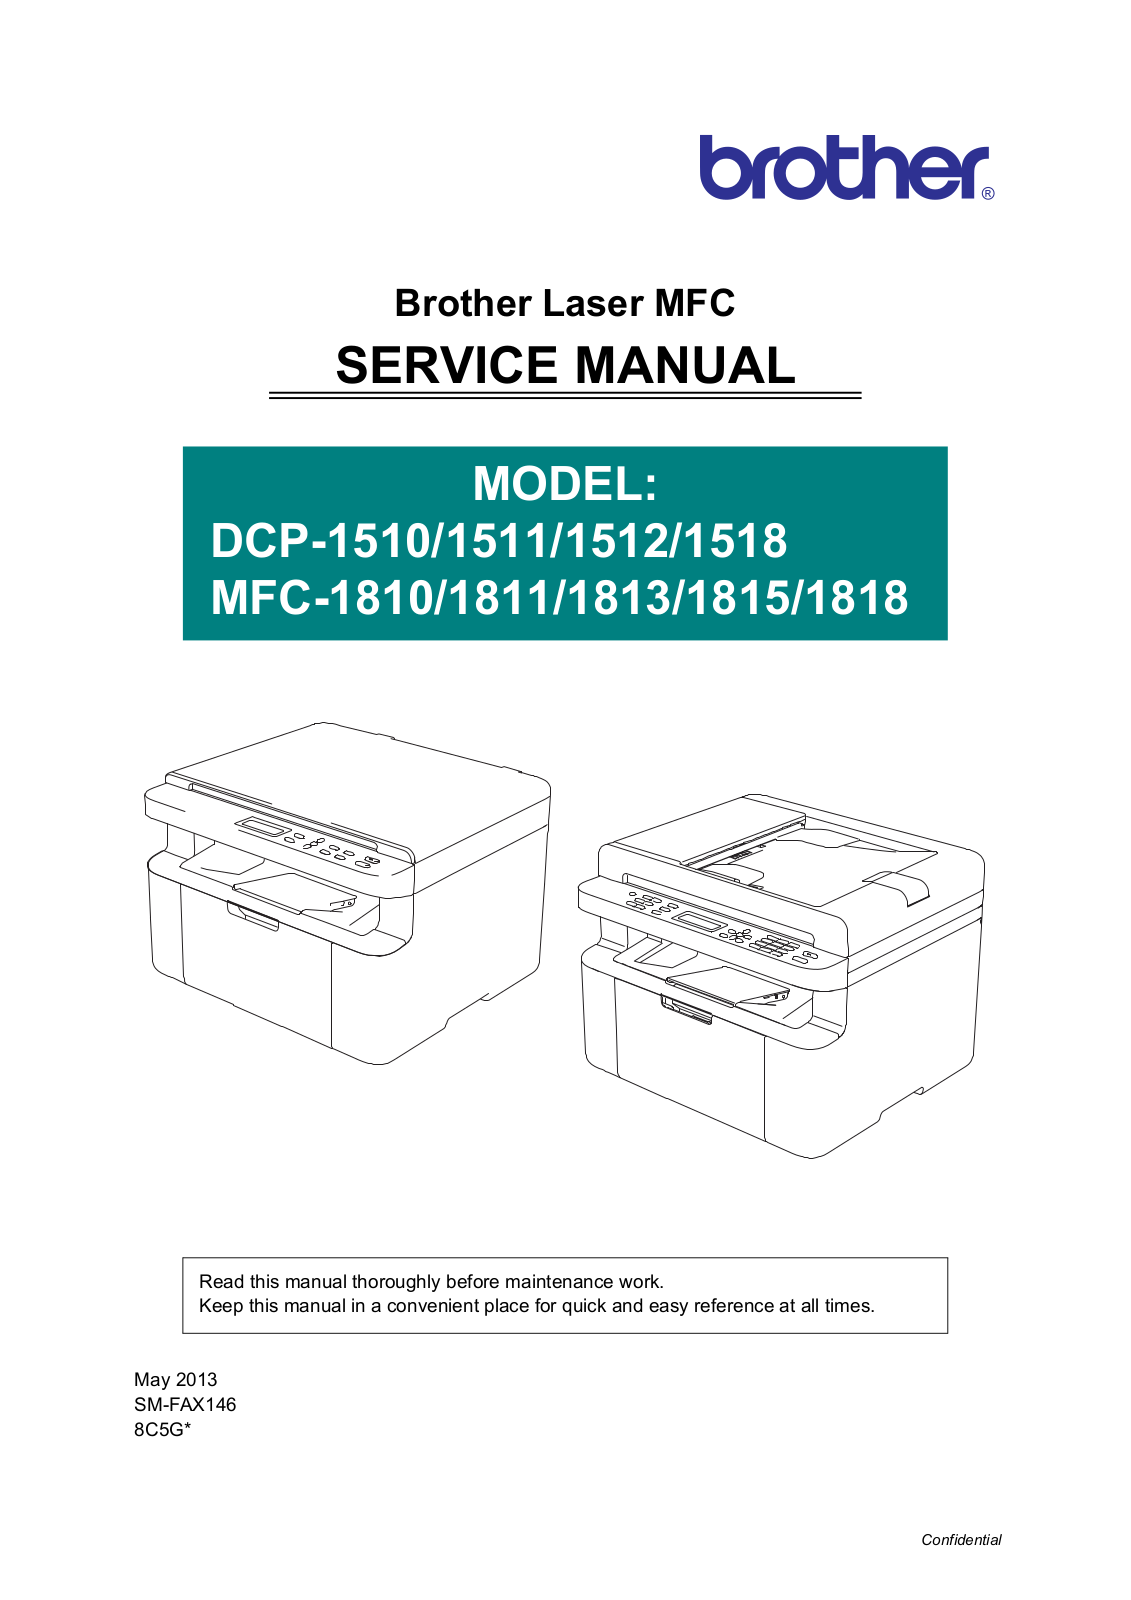 Brother dcp 1510, dcp 1511, dcp 1512, dcp 1518, mfc 1810 Service Manual